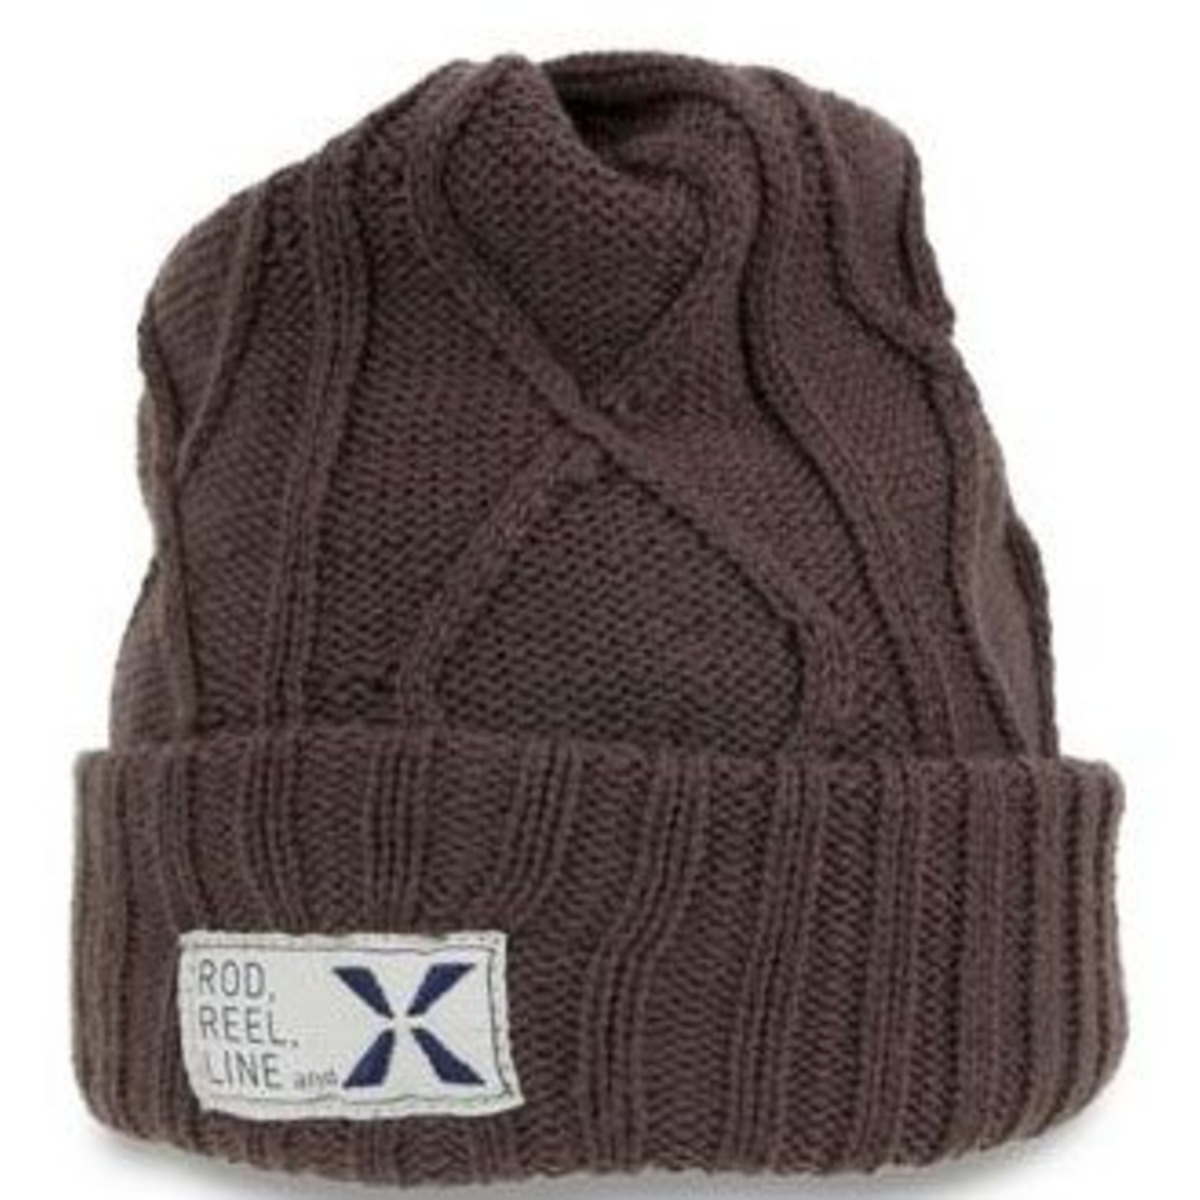 Shimano Cable Knit Xefo Megaheat Cap - Tungsten